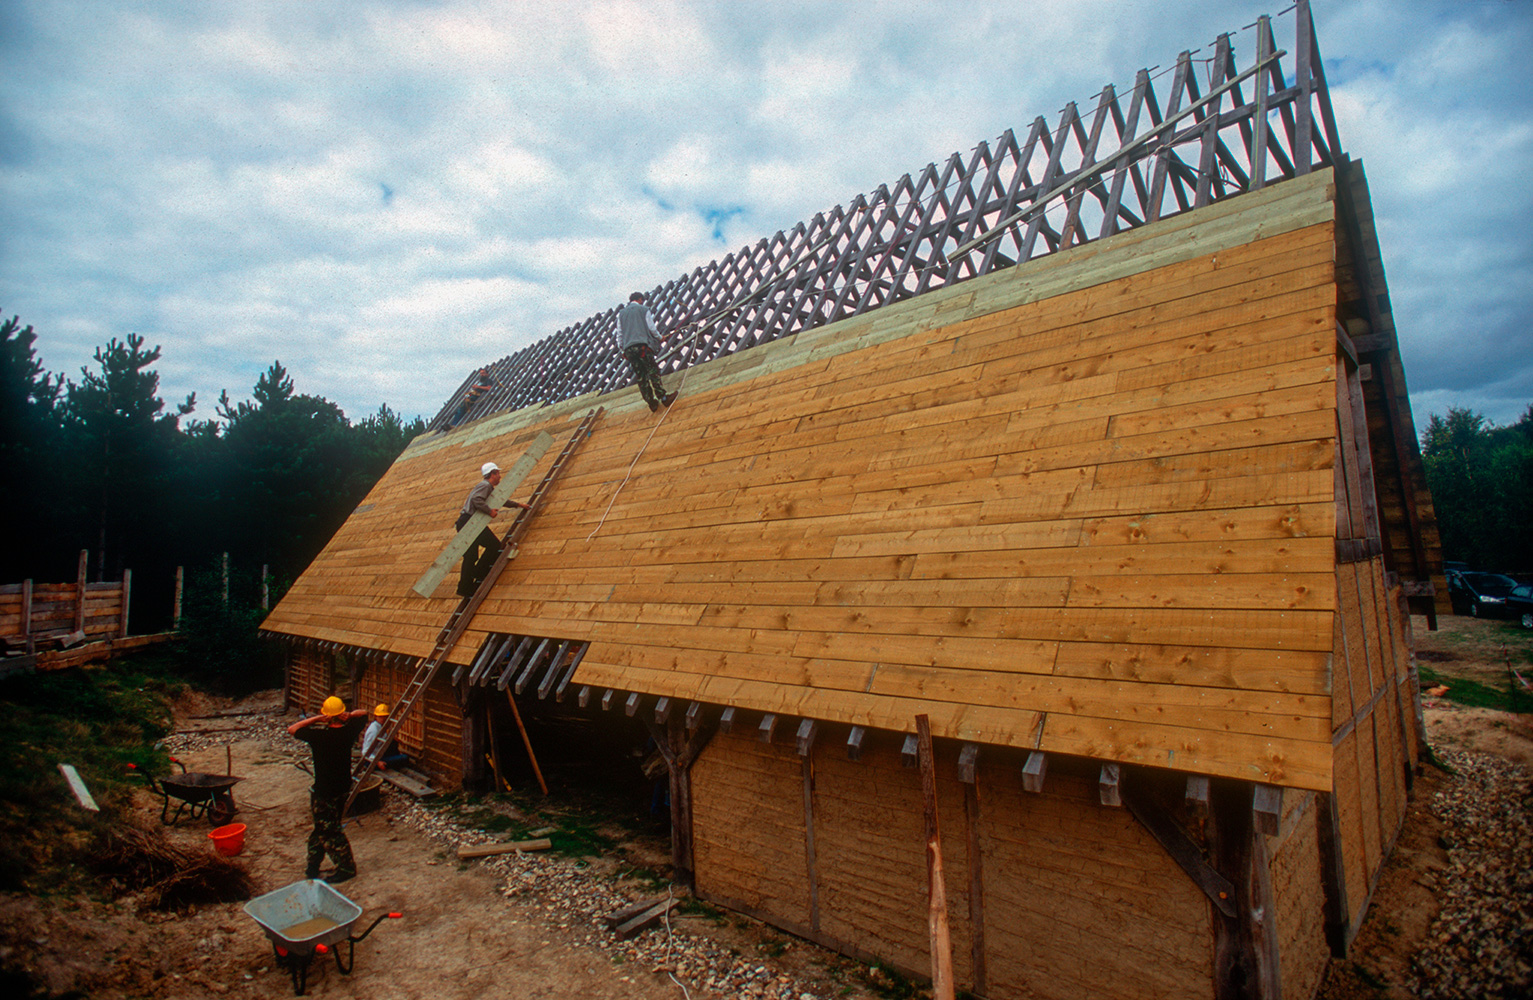 The softwood sarking boards being put on ready for shingling with oak.This is from the Wildwood Trust website;{quote}The site was cleared in 2001 and work on the Longhall commenced at Easter the following year. At the end of 2004, the main structure of this 20m × 10m × 10m building was completed and before the onset of winter, we had clad most of the roof with softwood sarking boards, awaiting the first 10,000 hand-cleft oak shingles for delivery in 2005. That year saw the completion of the porches and the commencement of the huge task of nailing on the shingles. Walling advanced well, too. In 2006, the front roof was completed and shingling advanced about a third of the way up the back roof. The walls were completely infilled, doors and hinges were fitted and our hall was secure for the first time. 2007 saw the completion of shingling, some 18,000 eventually finding their way onto the roof.It is an impressive sight and is certainly the largest reconstructed early medieval building in private hands in Europe. Built entirely of English oak, all of which has been harvested from trees growing in Kent, (many within a couple of miles of the site), the site in general and the Longhall in particular, has been conceived, planned, purchased, designed and constructed by our members. What you see is the result of many long hours of research, discussion and the practical application of skills with which our ancestors would have felt at home.{quote}